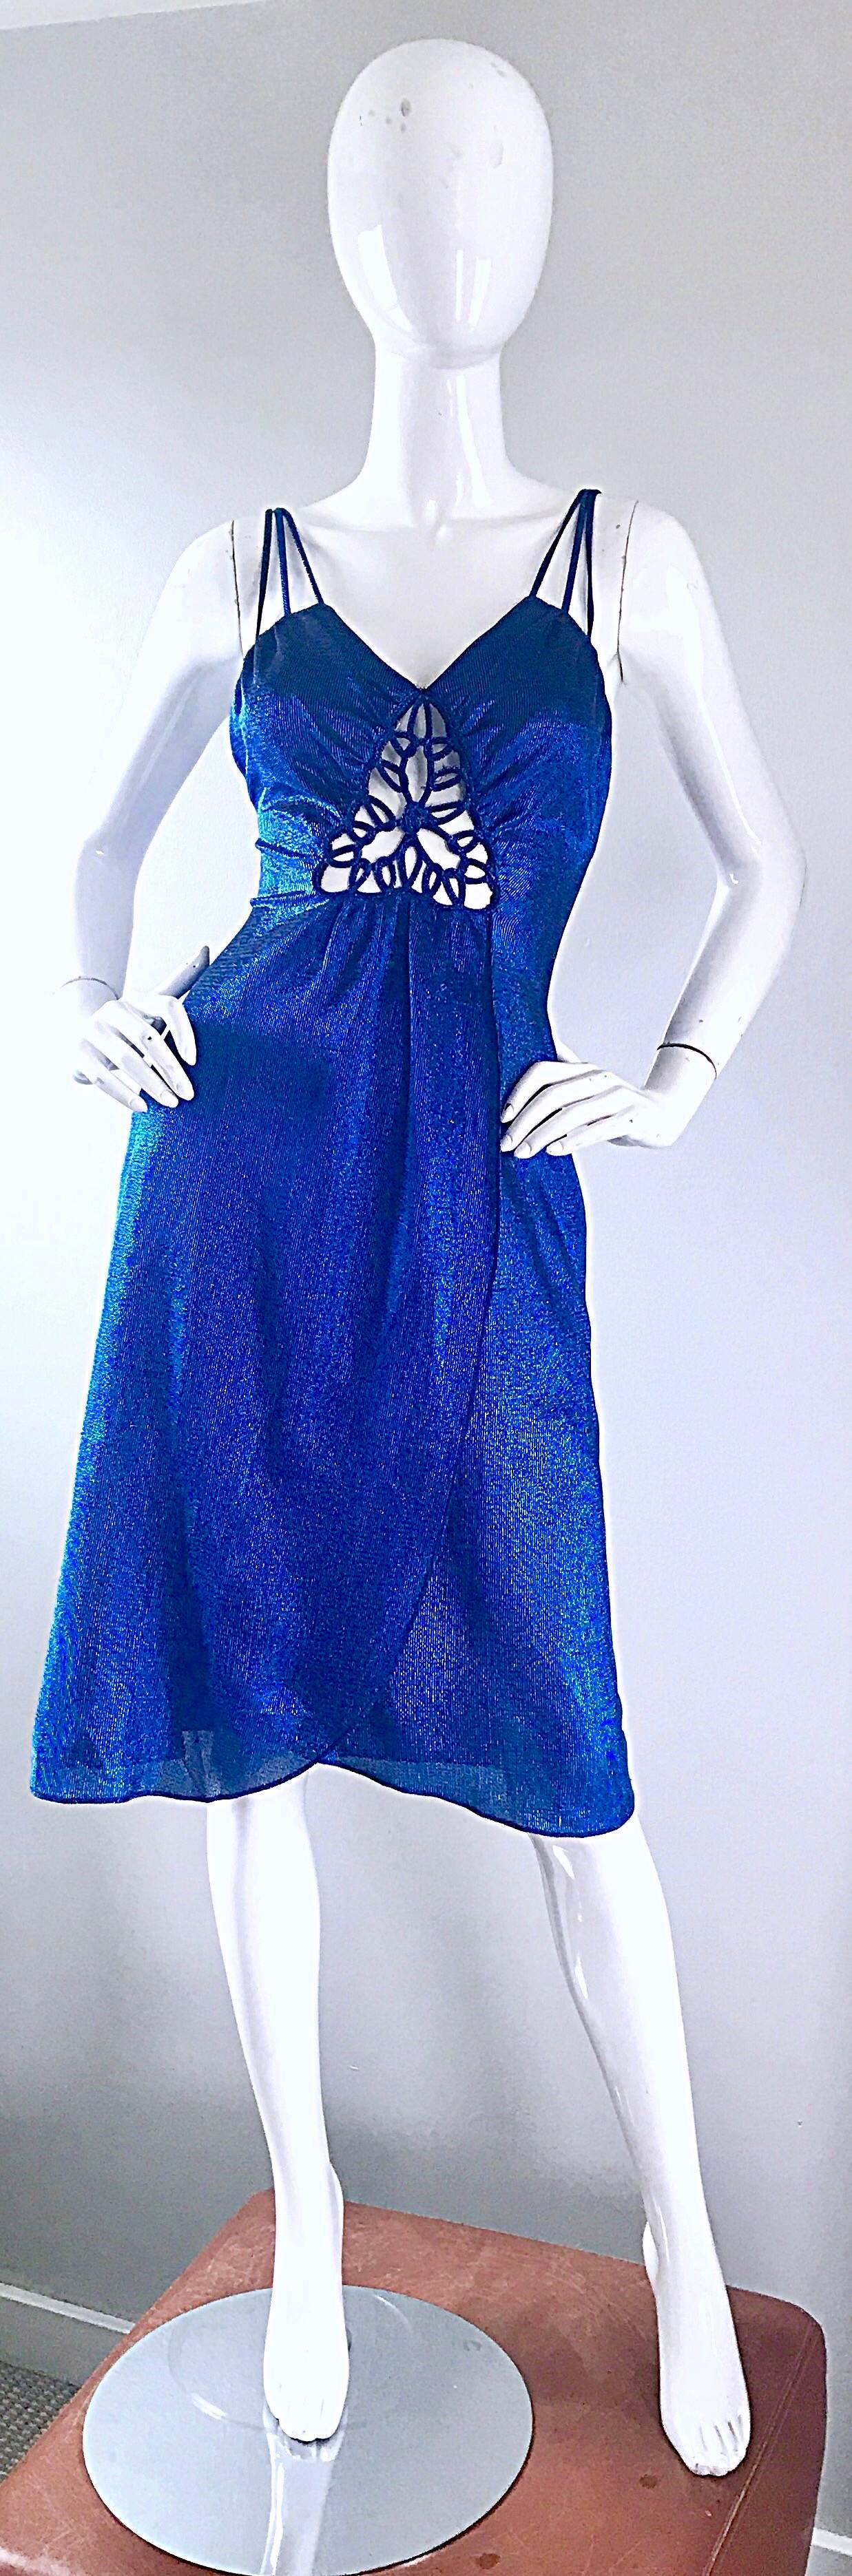 Sexy 1970s SAMIR electric blue metallic slinky cut-out dress! Features an intricately cut-out detail at center bust. Hidden zipper up the back. Three straps at each shoulder. Flattering flirty wrap style skirt, with a fitted bodice. Looks amazing